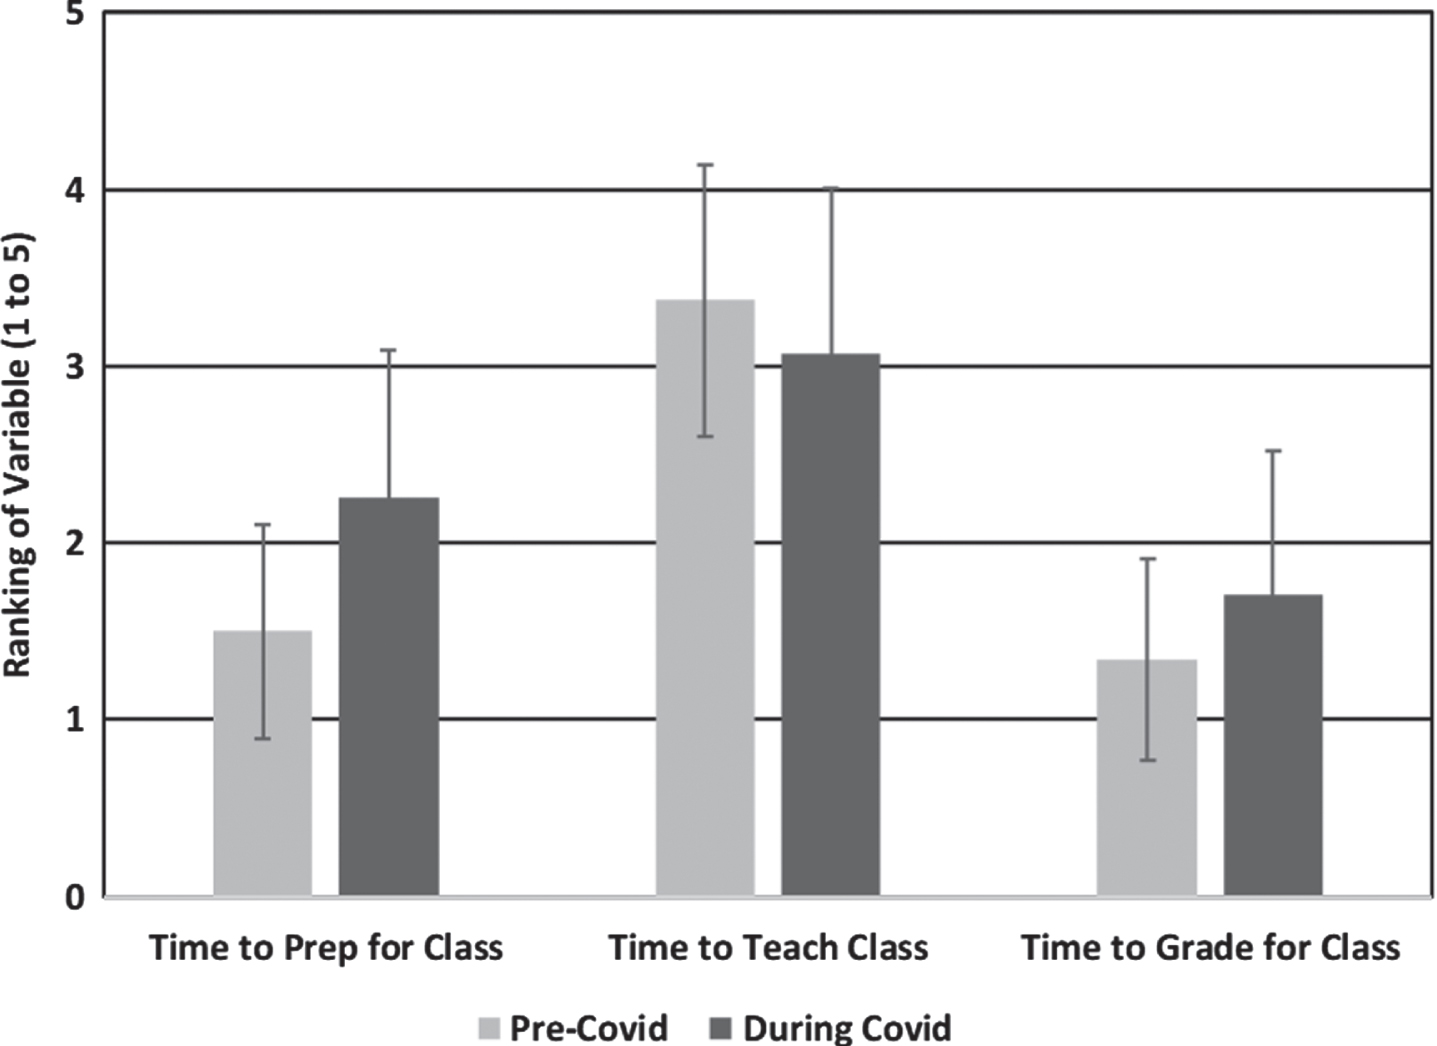 Pre- and during COVID perceptions of Time to prep for class, Time to teach class, and Time to grade for class (1: less than 10 hours, 2:11 to 20 hours, 3:21 to 30 hours, 4:31 to 40 hours, 5: more than 40 hours). All differences between pre and during are significant at p < 0.05.